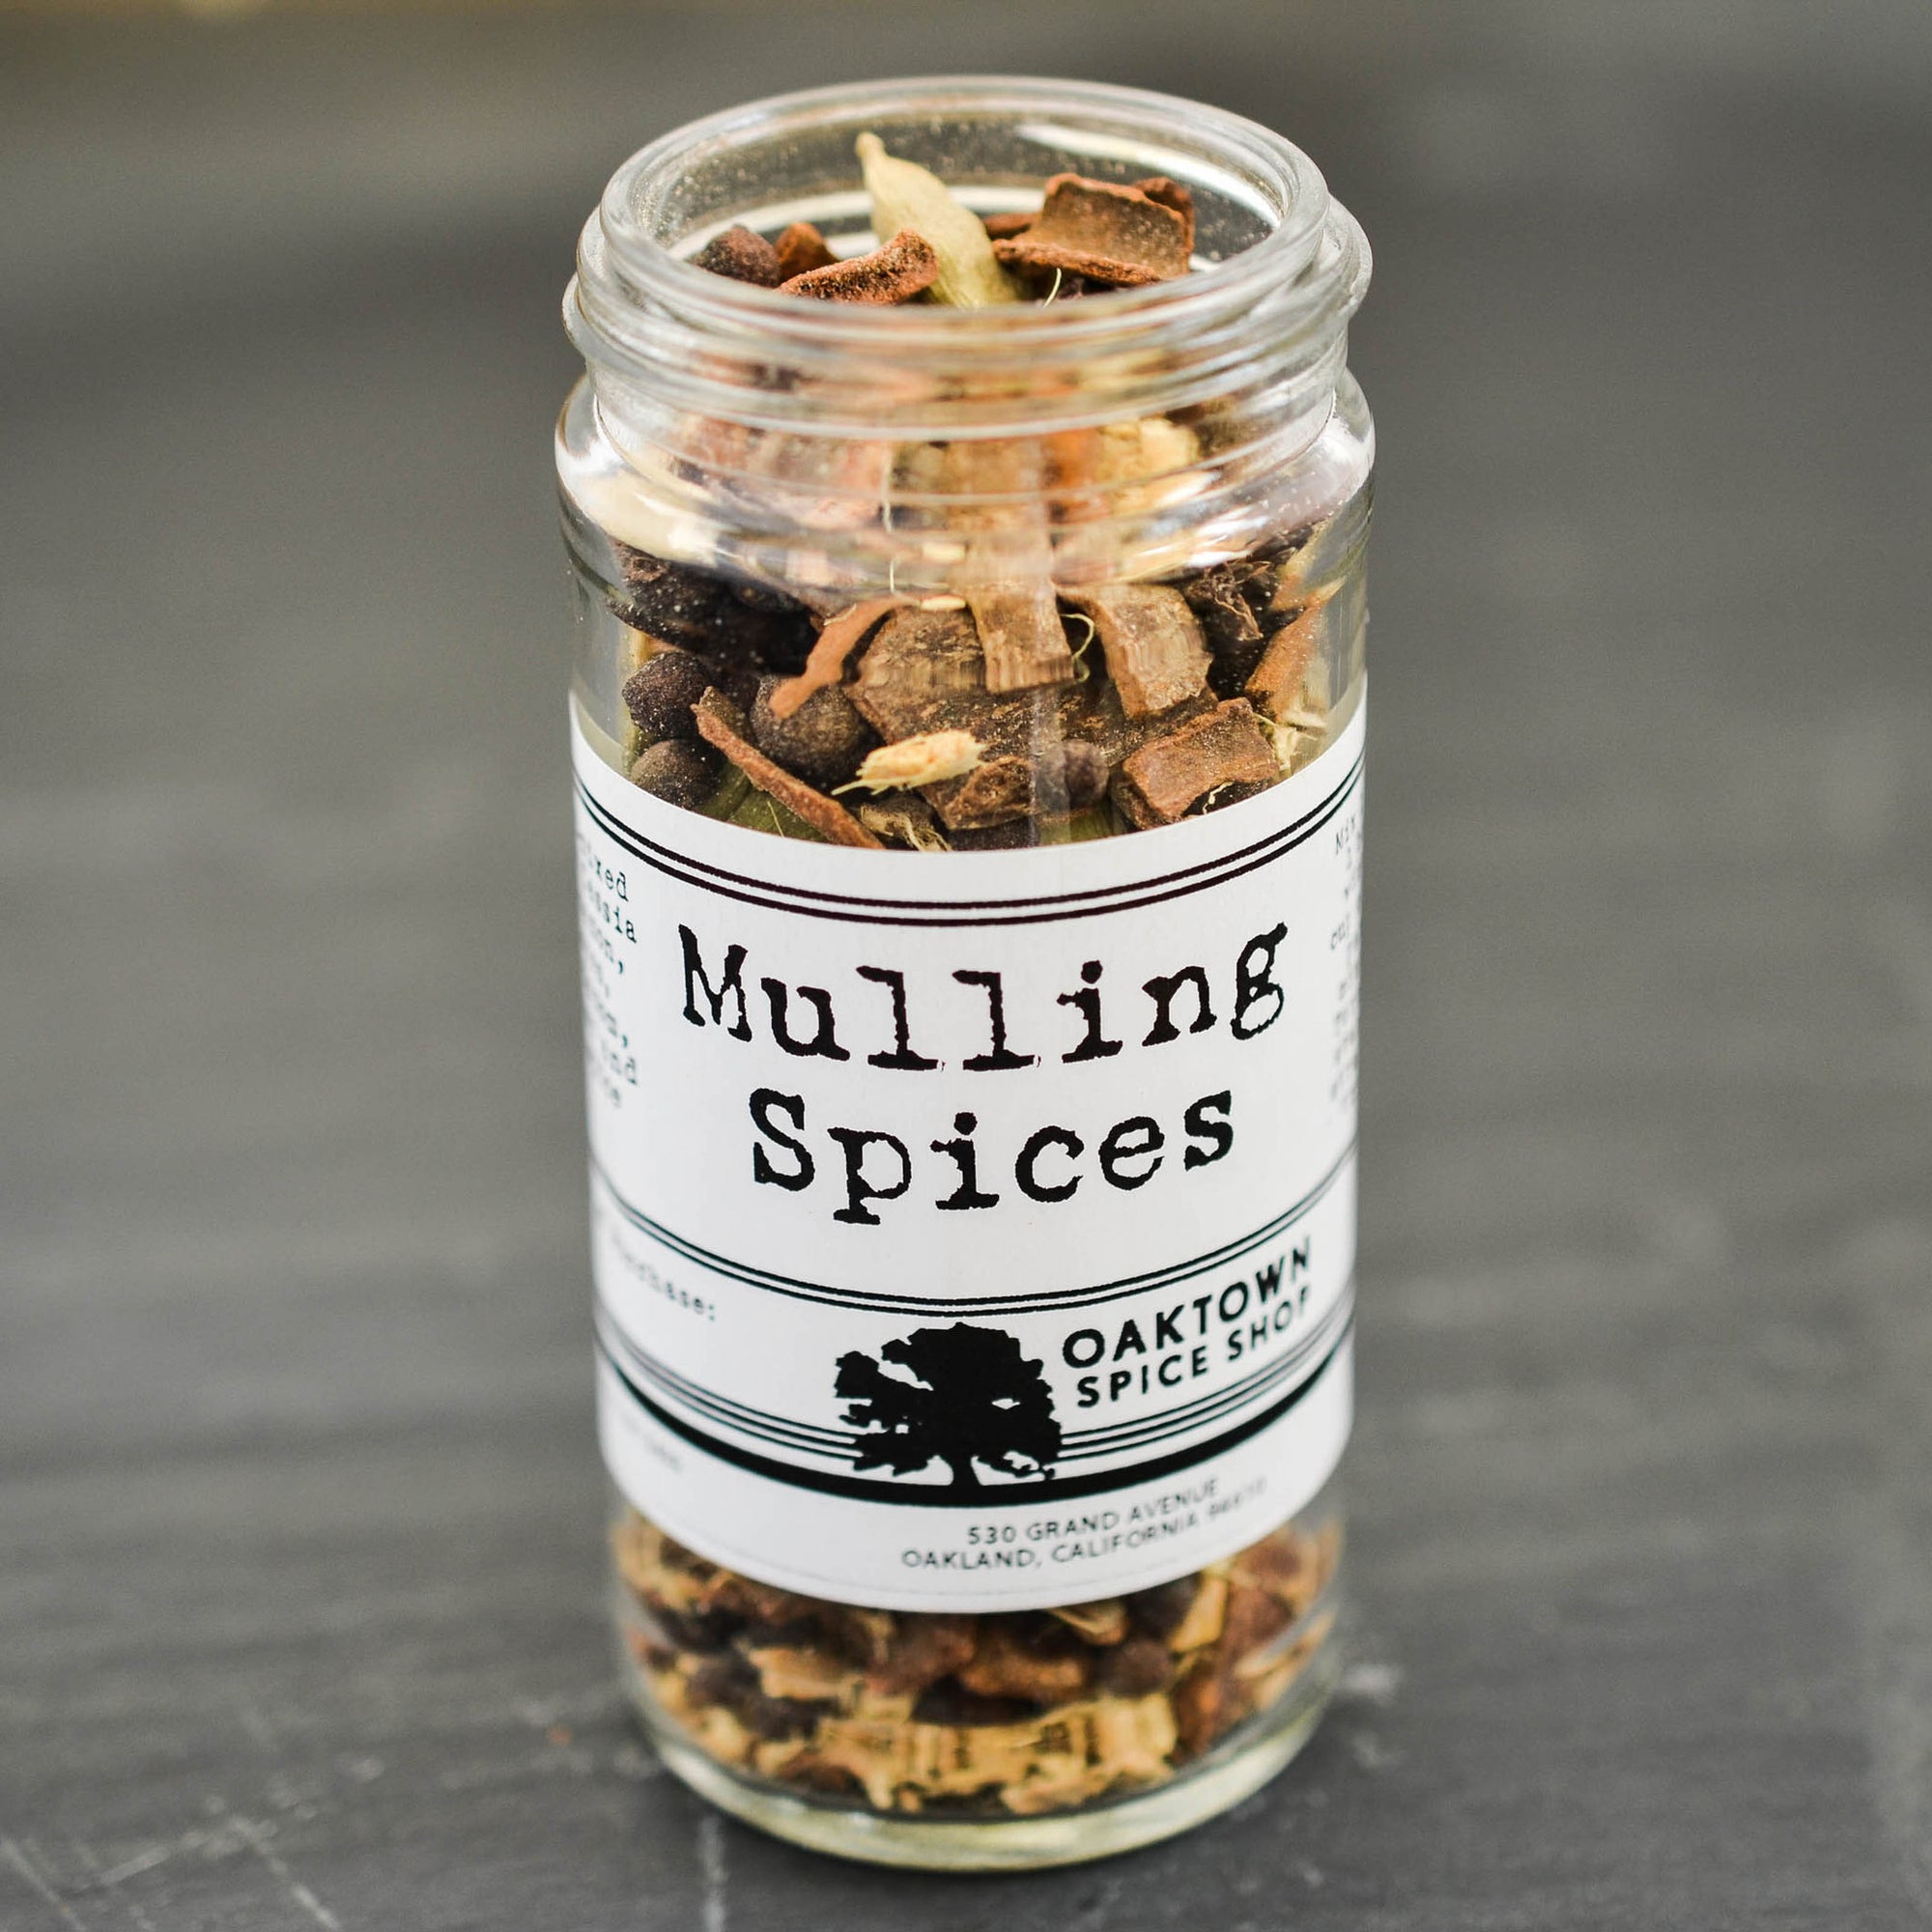 Chinese 5-Spice Blend by NY Spice Shop